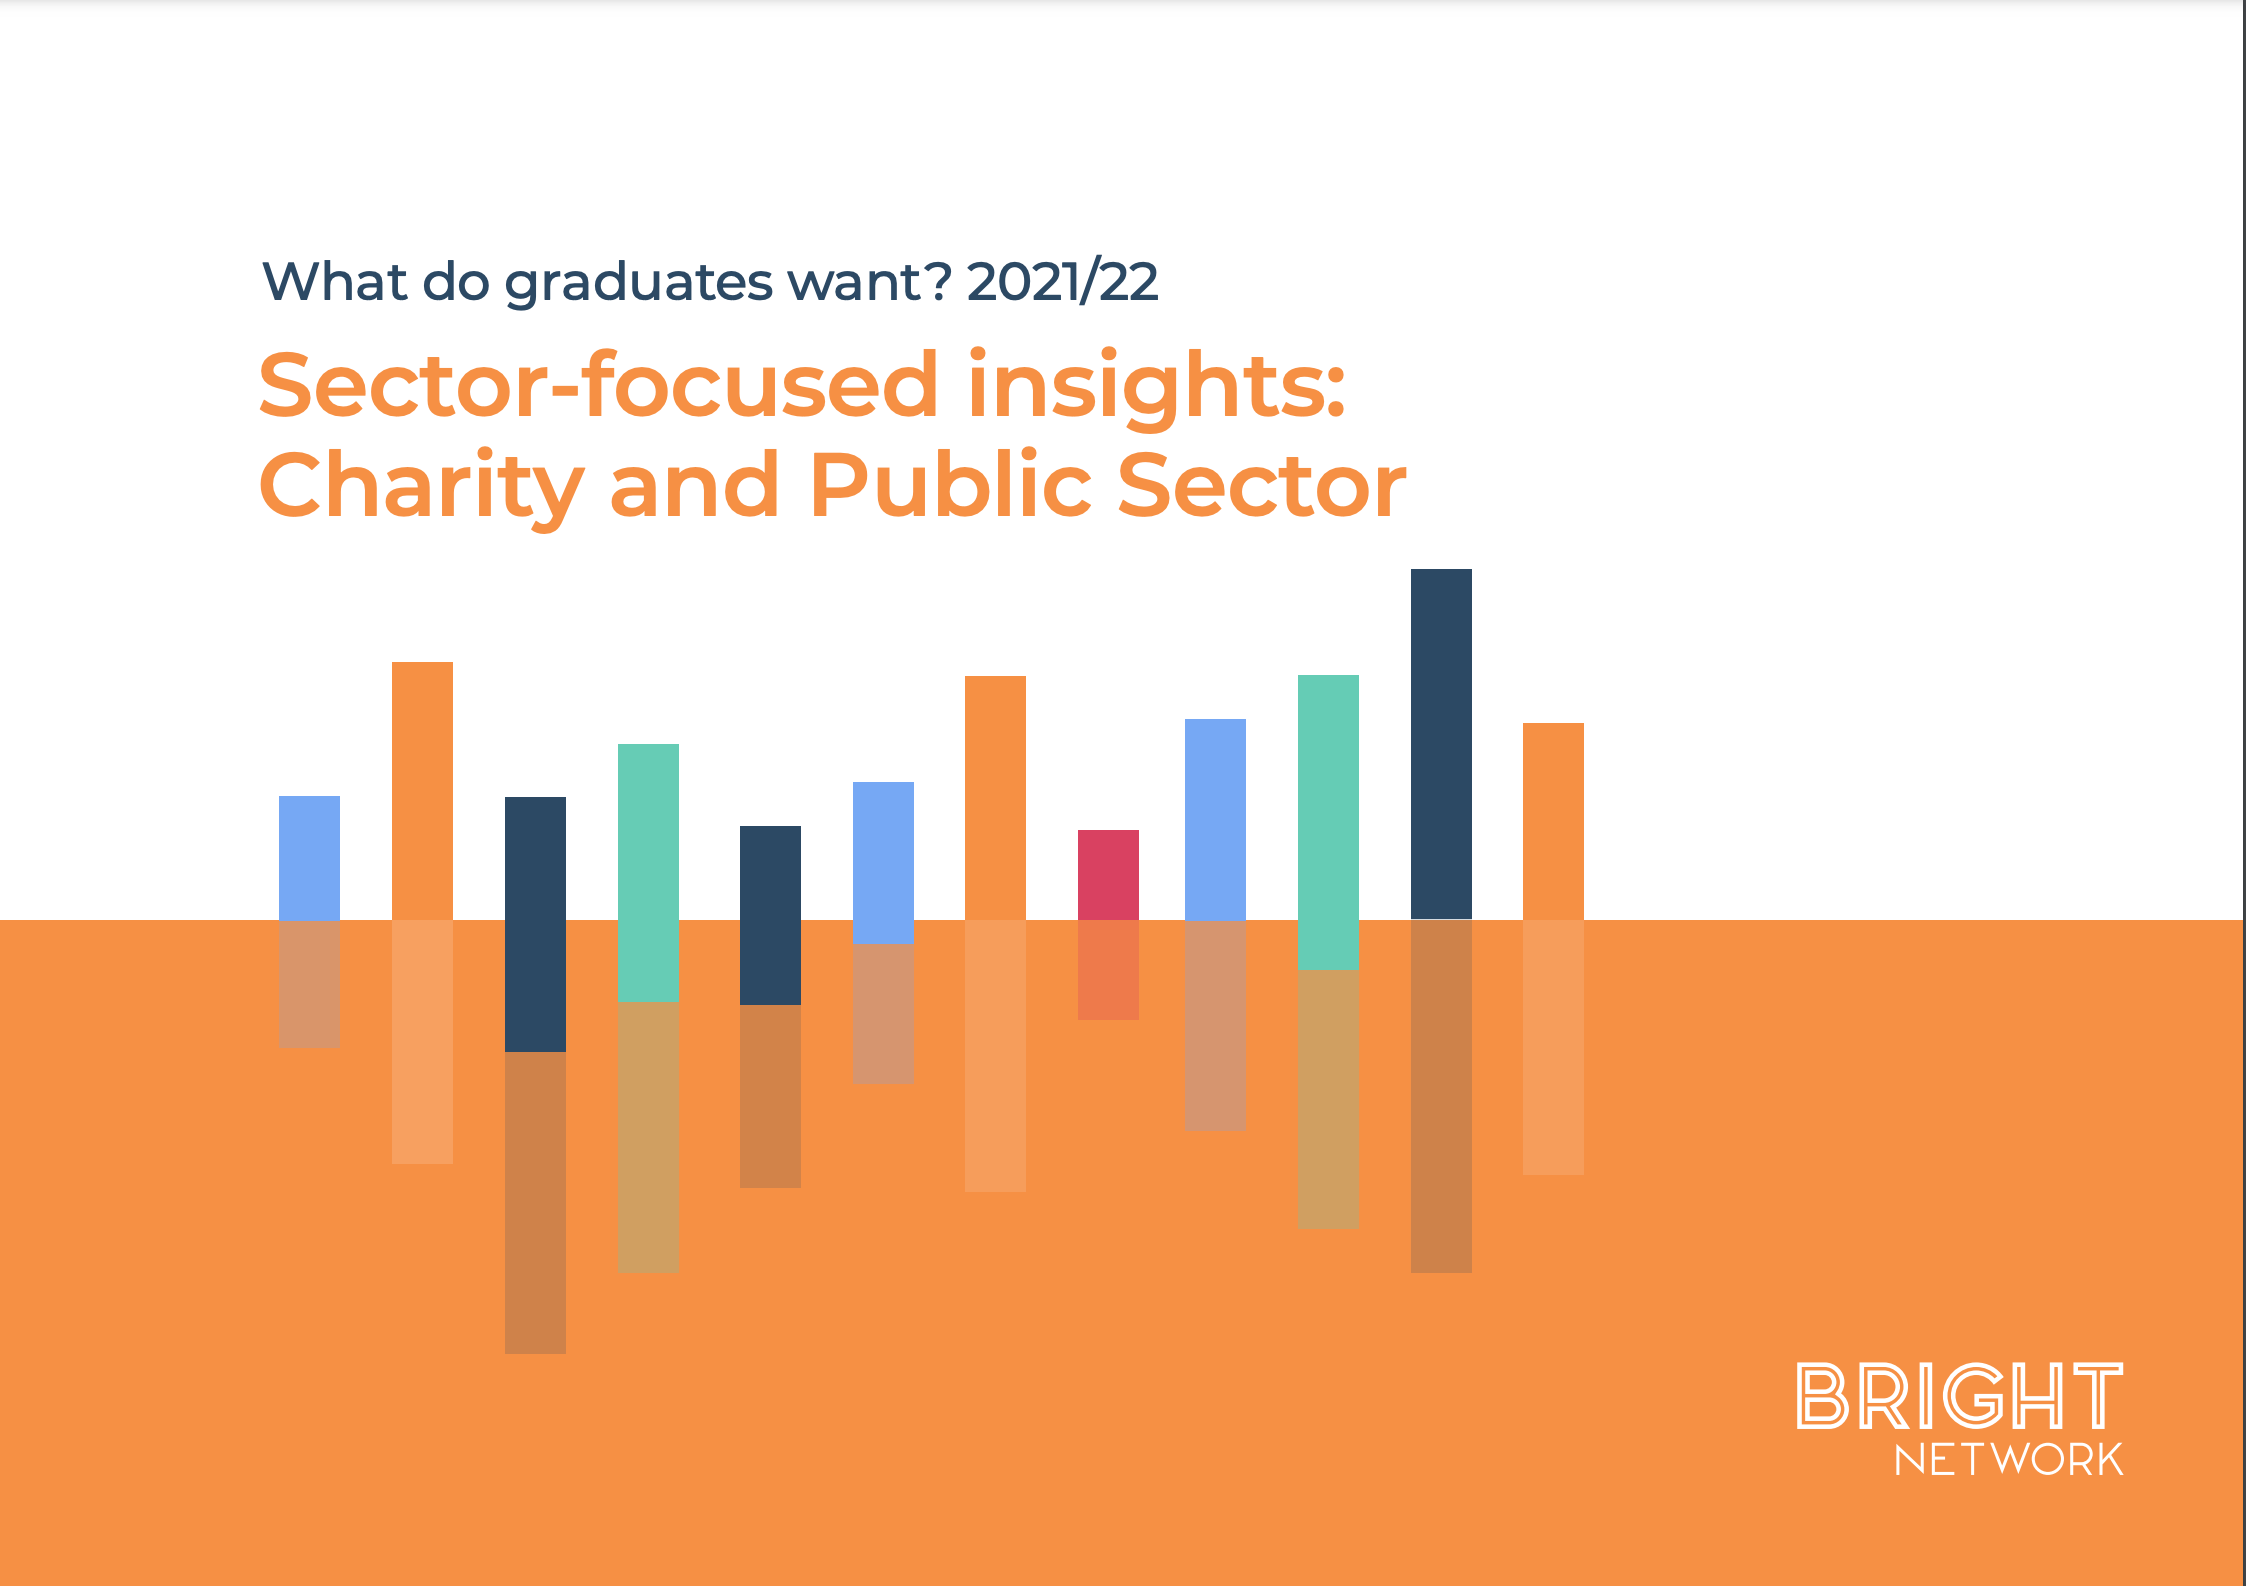 Sector-focused insights: Charity and Public Sector